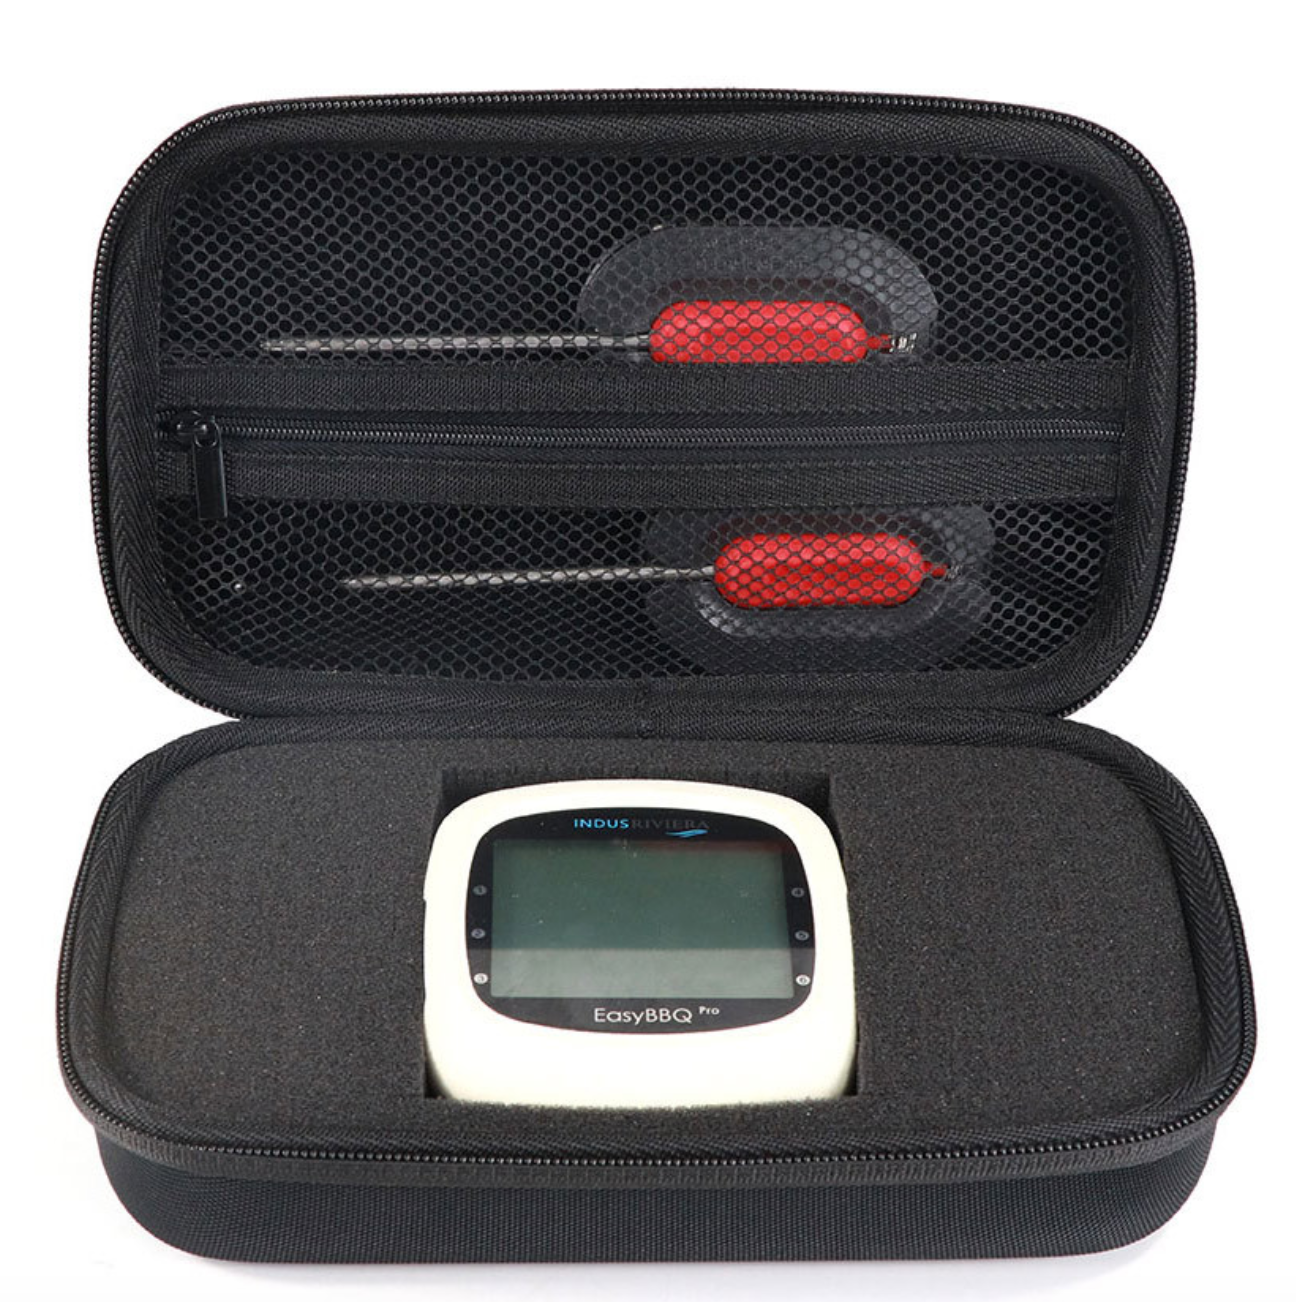 Factory OEM EVA Hard Carrying Case for Cooking Thermometer/BBQ Thermometer Featured Image